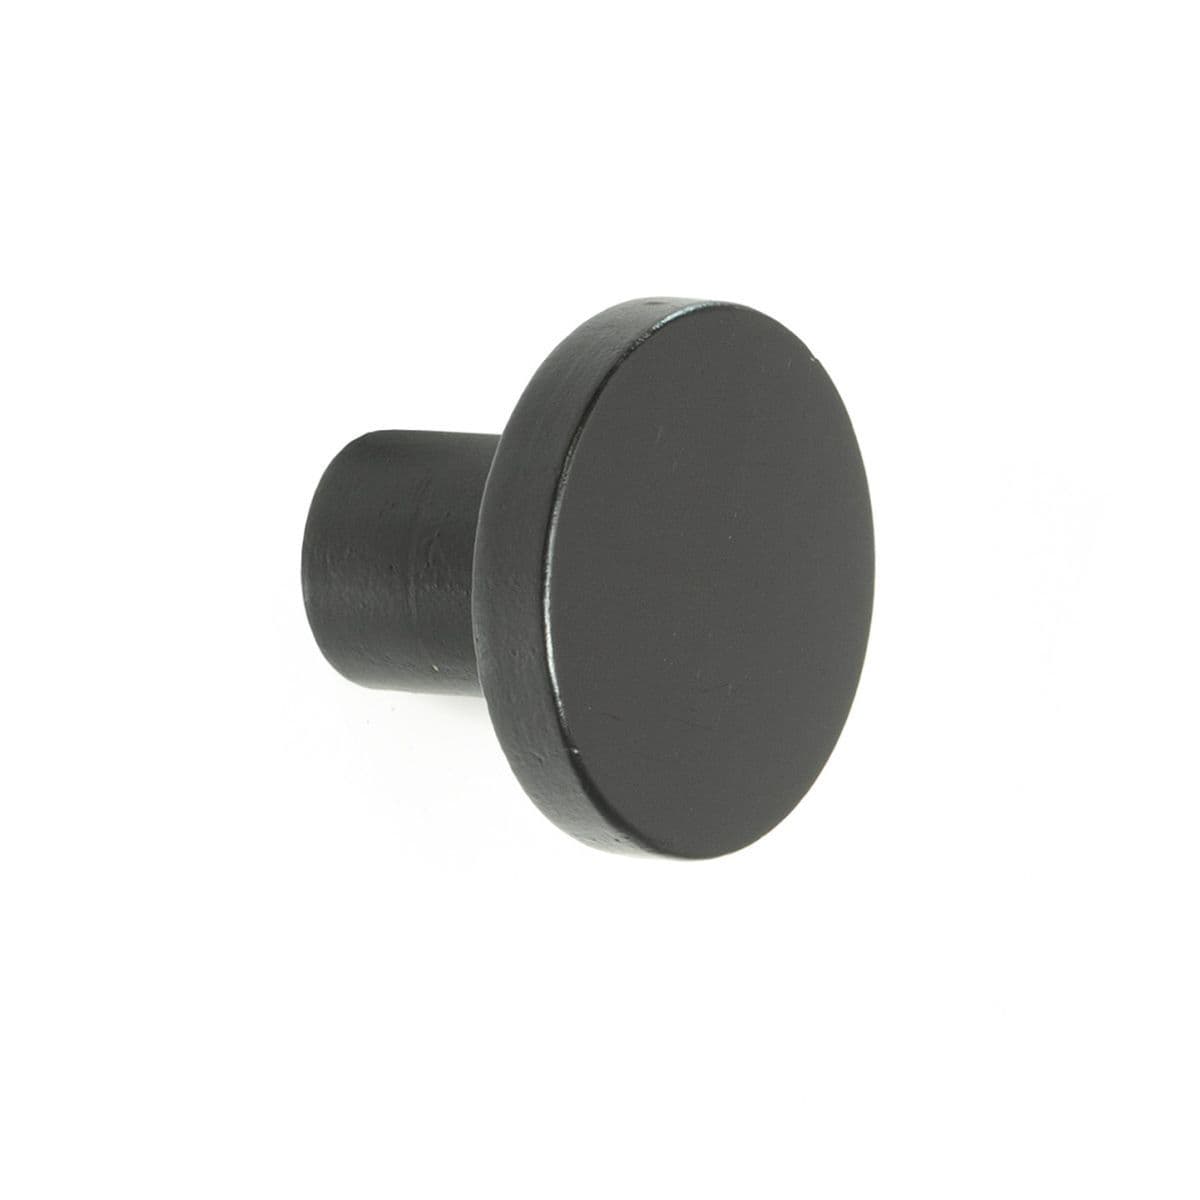 MALMO WOODEN ROUND KNOB Cupboard Handle - 30mm diameter - 4 finishes (PWS K1127.30)